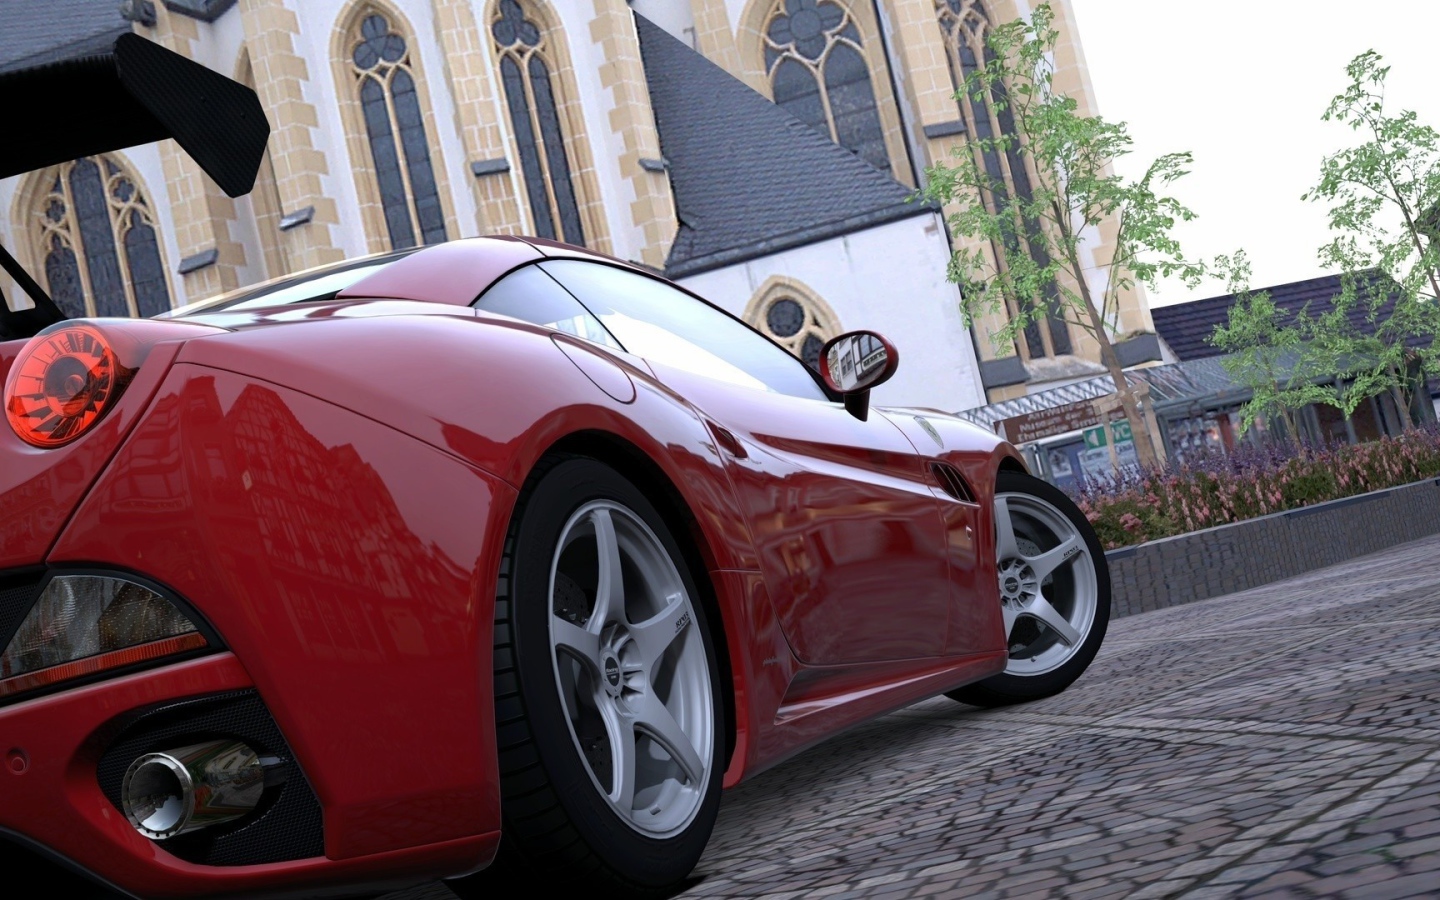 Red sports car in the square at the Cathedral